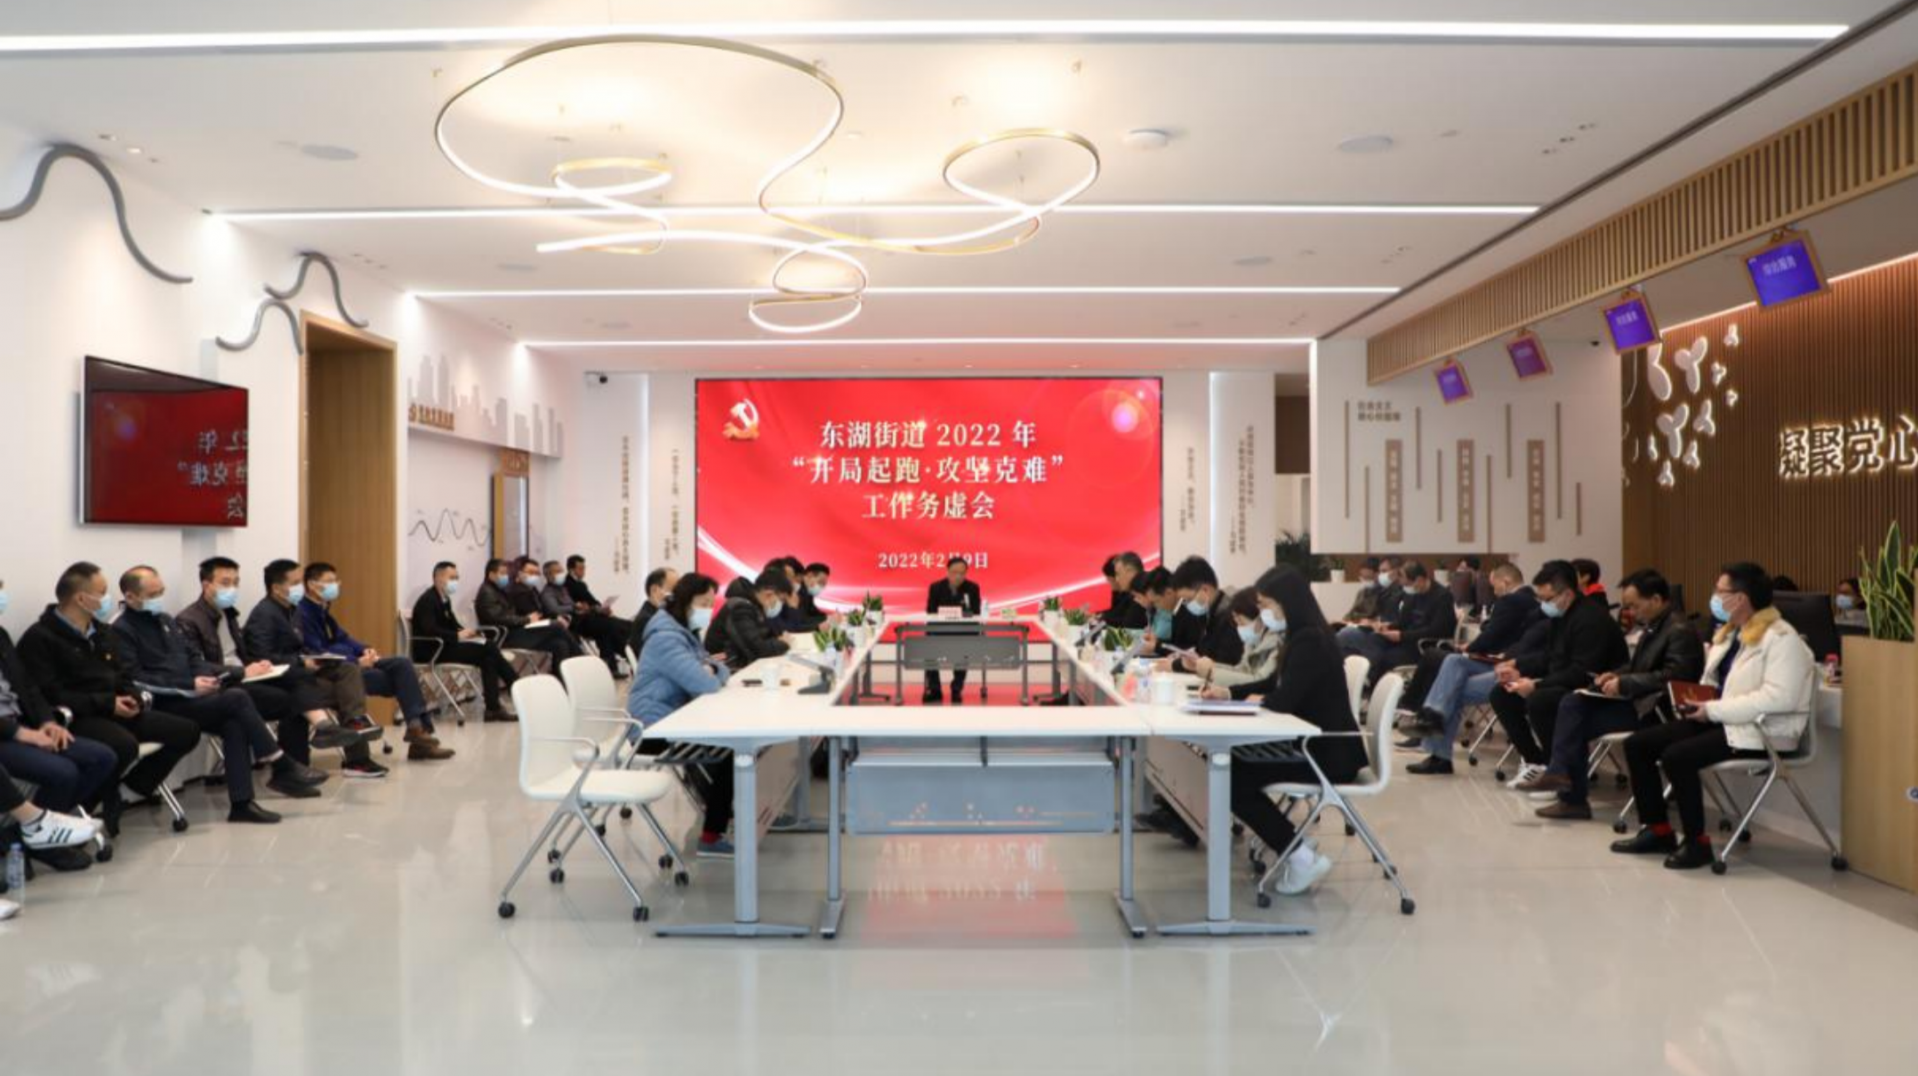  People work hard, spring comes early, and make new efforts! Donghu Subdistrict, Luohu District held a 2022 work retreat to "start the race and overcome difficulties"  